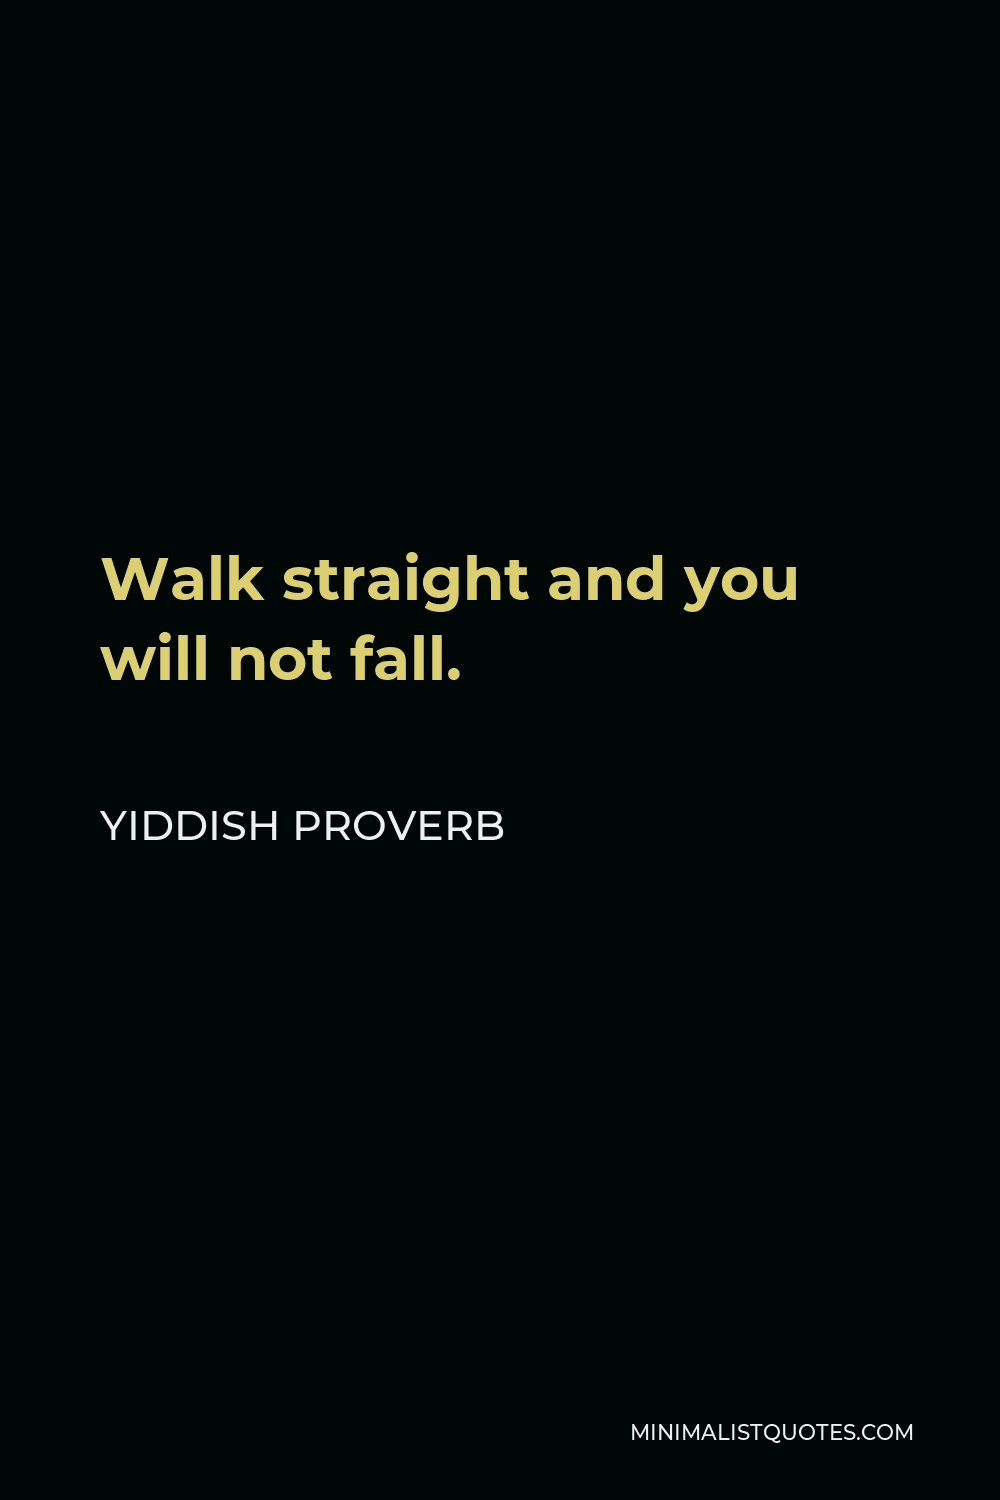 Yiddish Proverb Quote - Walk straight and you will not fall.